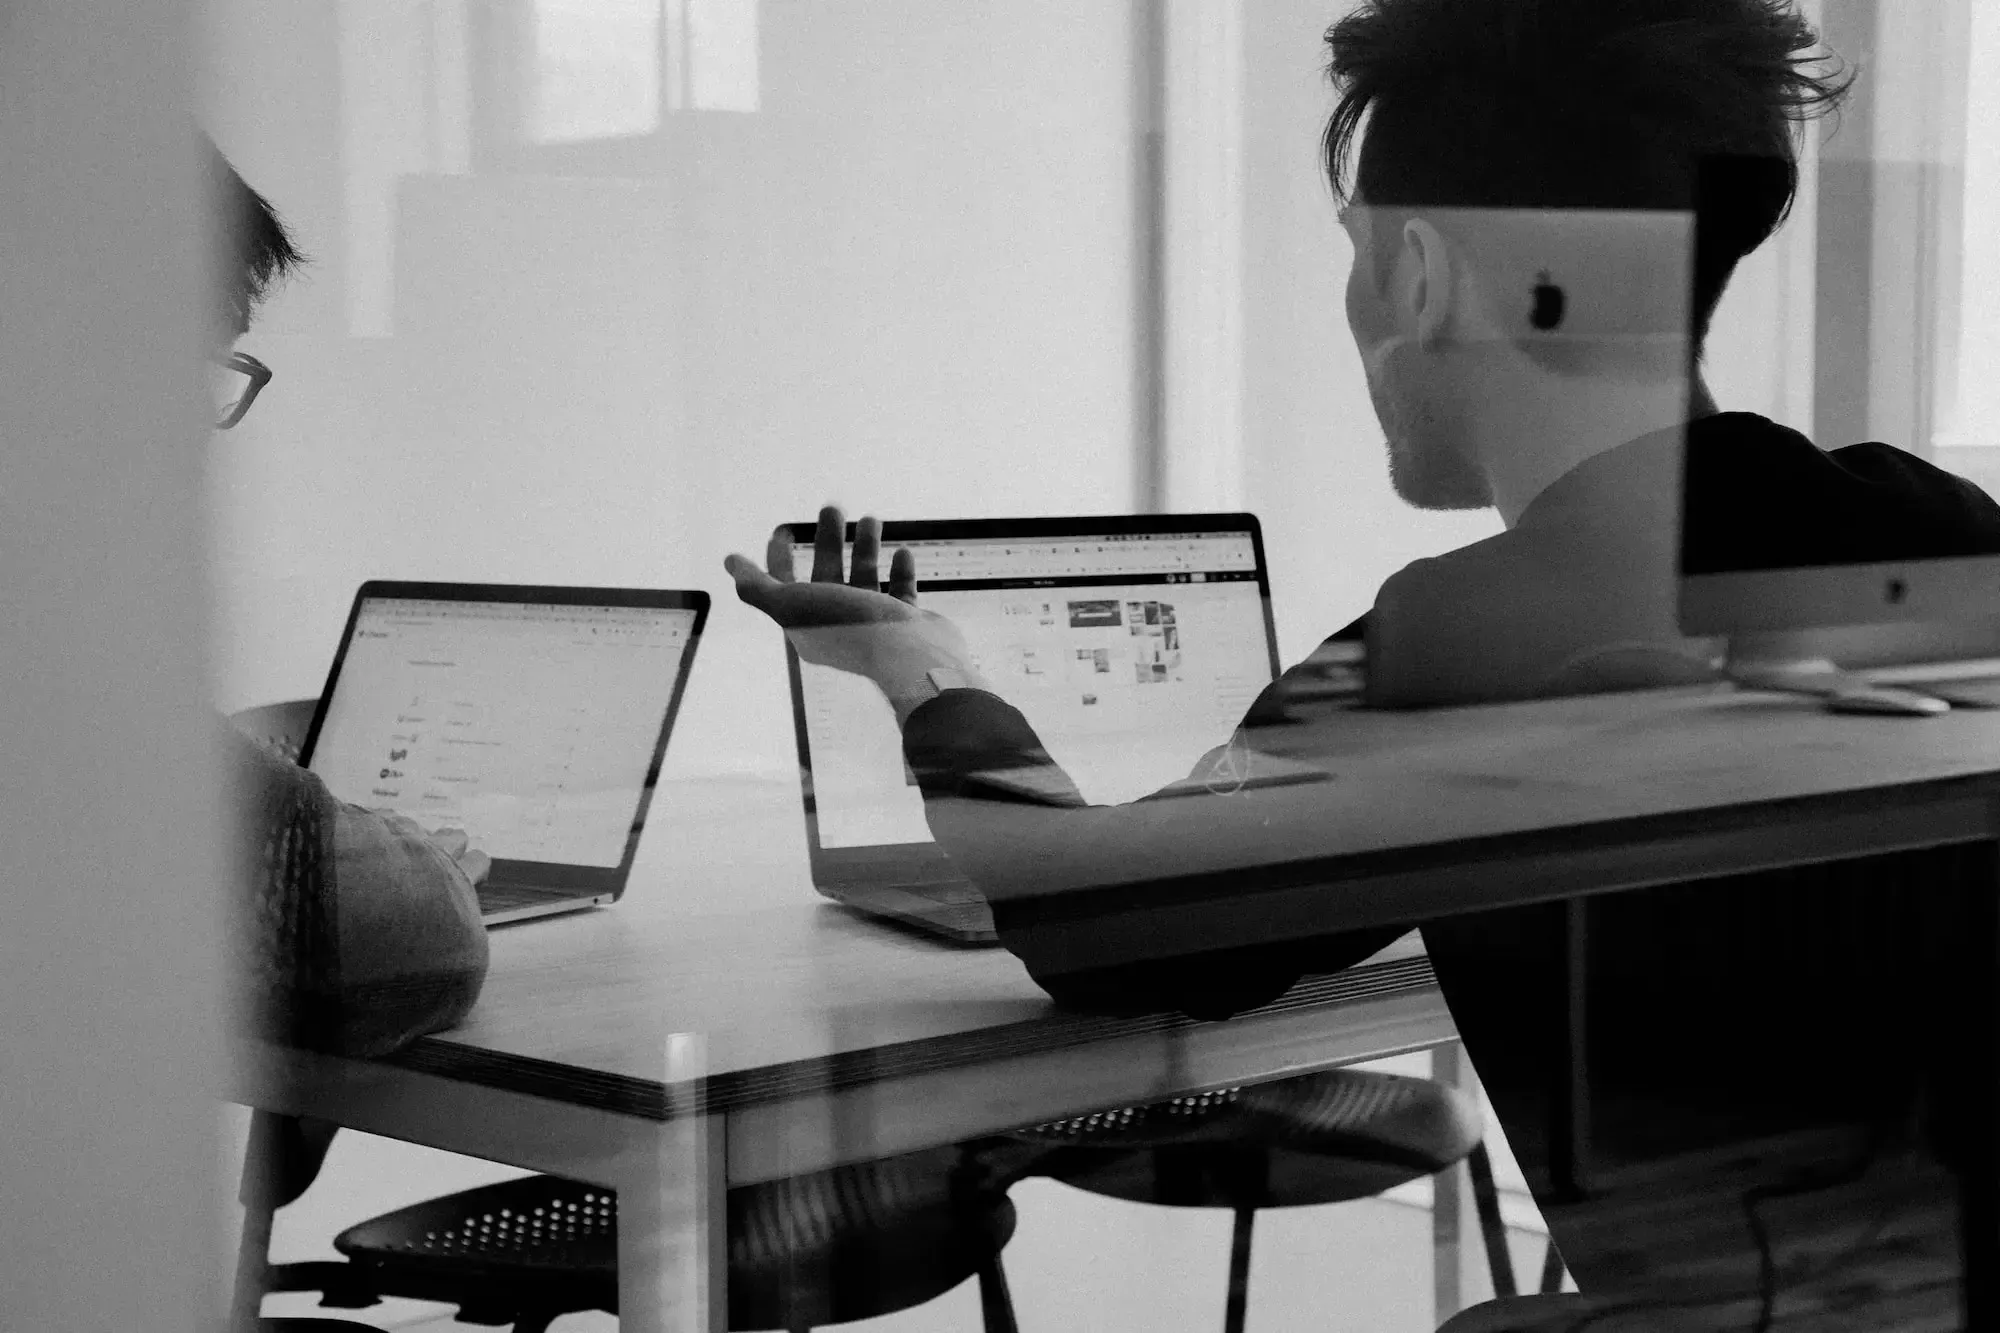 Two men are talking, laptops in front of them, black and white image.